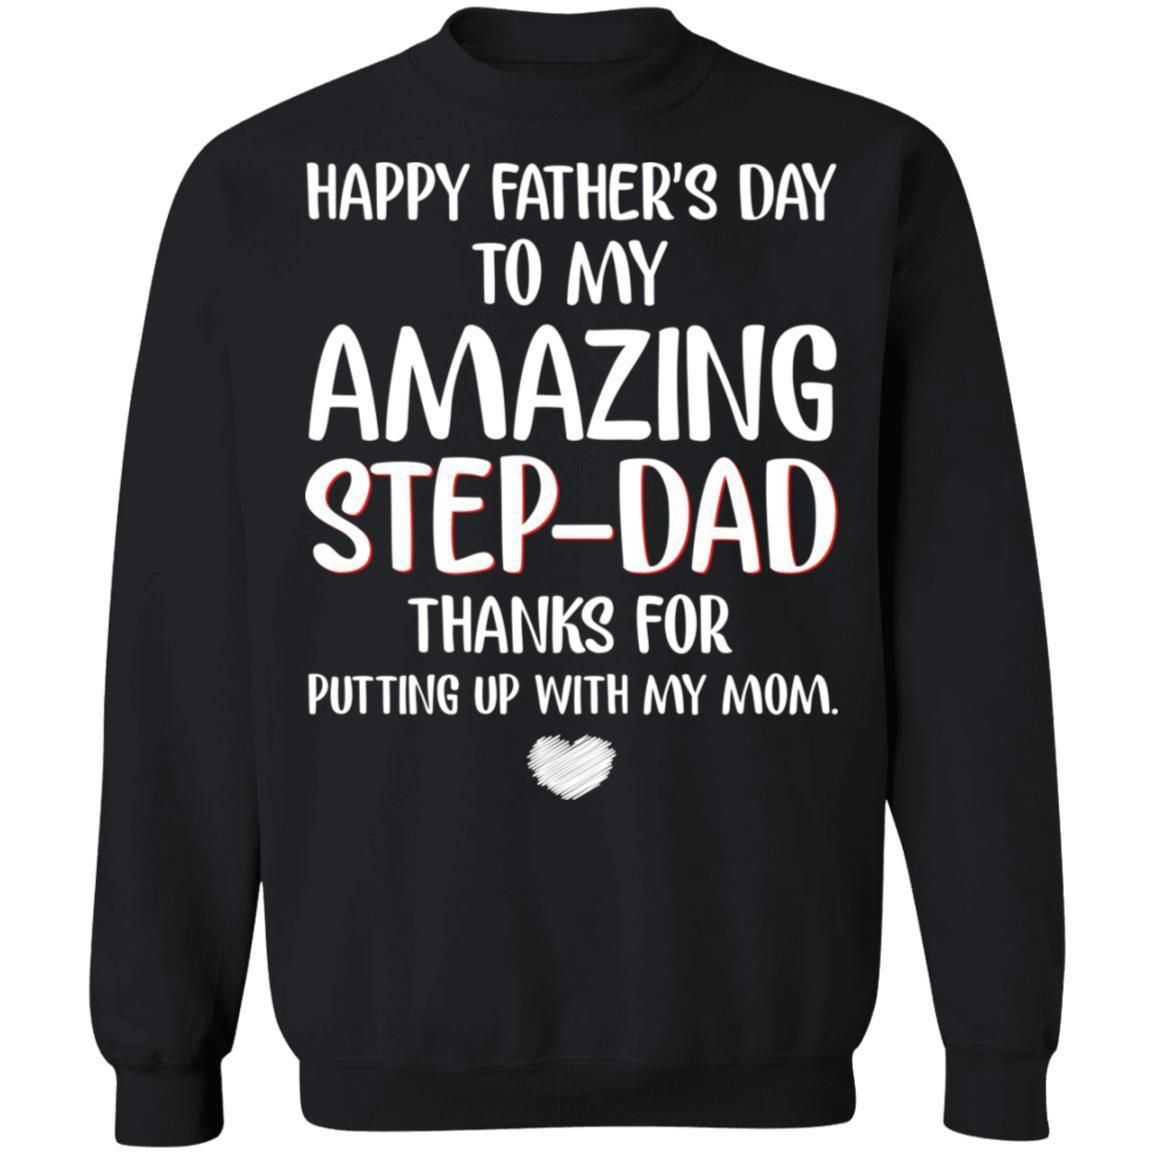 Happy Father's Day To My Amazing Step Dad Thanks for Putting Up With My Mom shirts